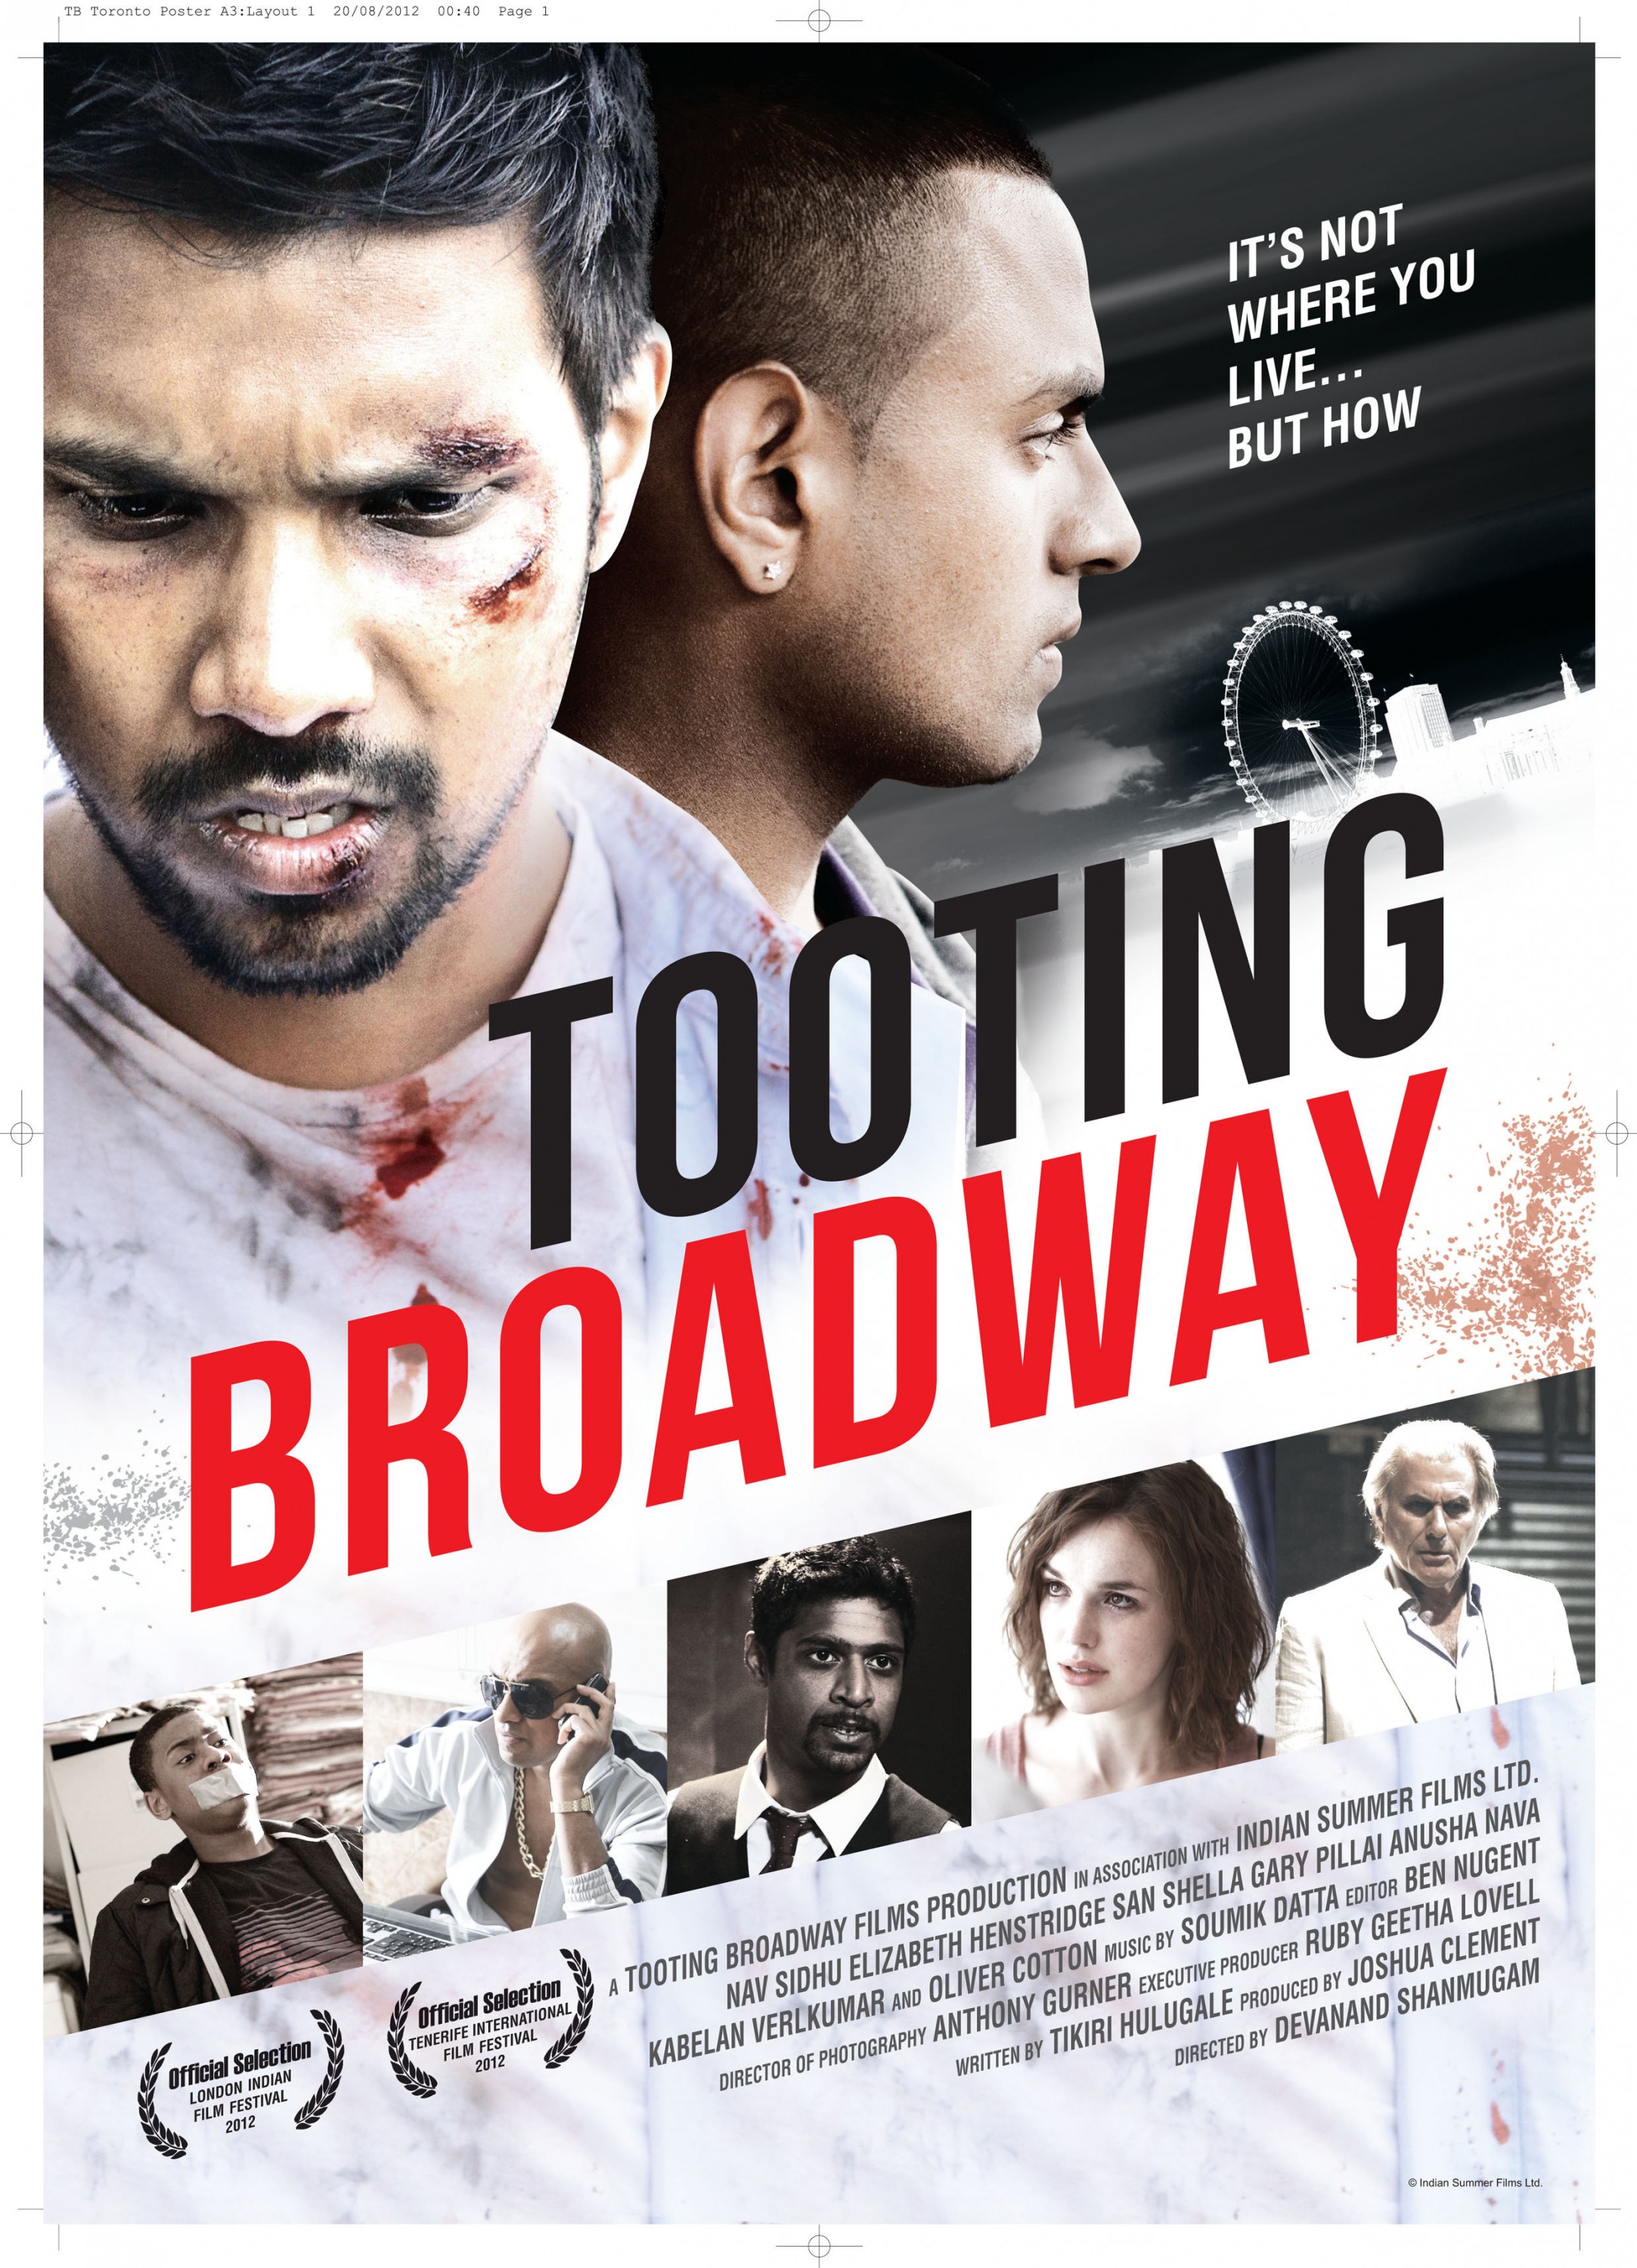 Mega Sized Movie Poster Image for Gangs of Tooting Broadway (#2 of 2)